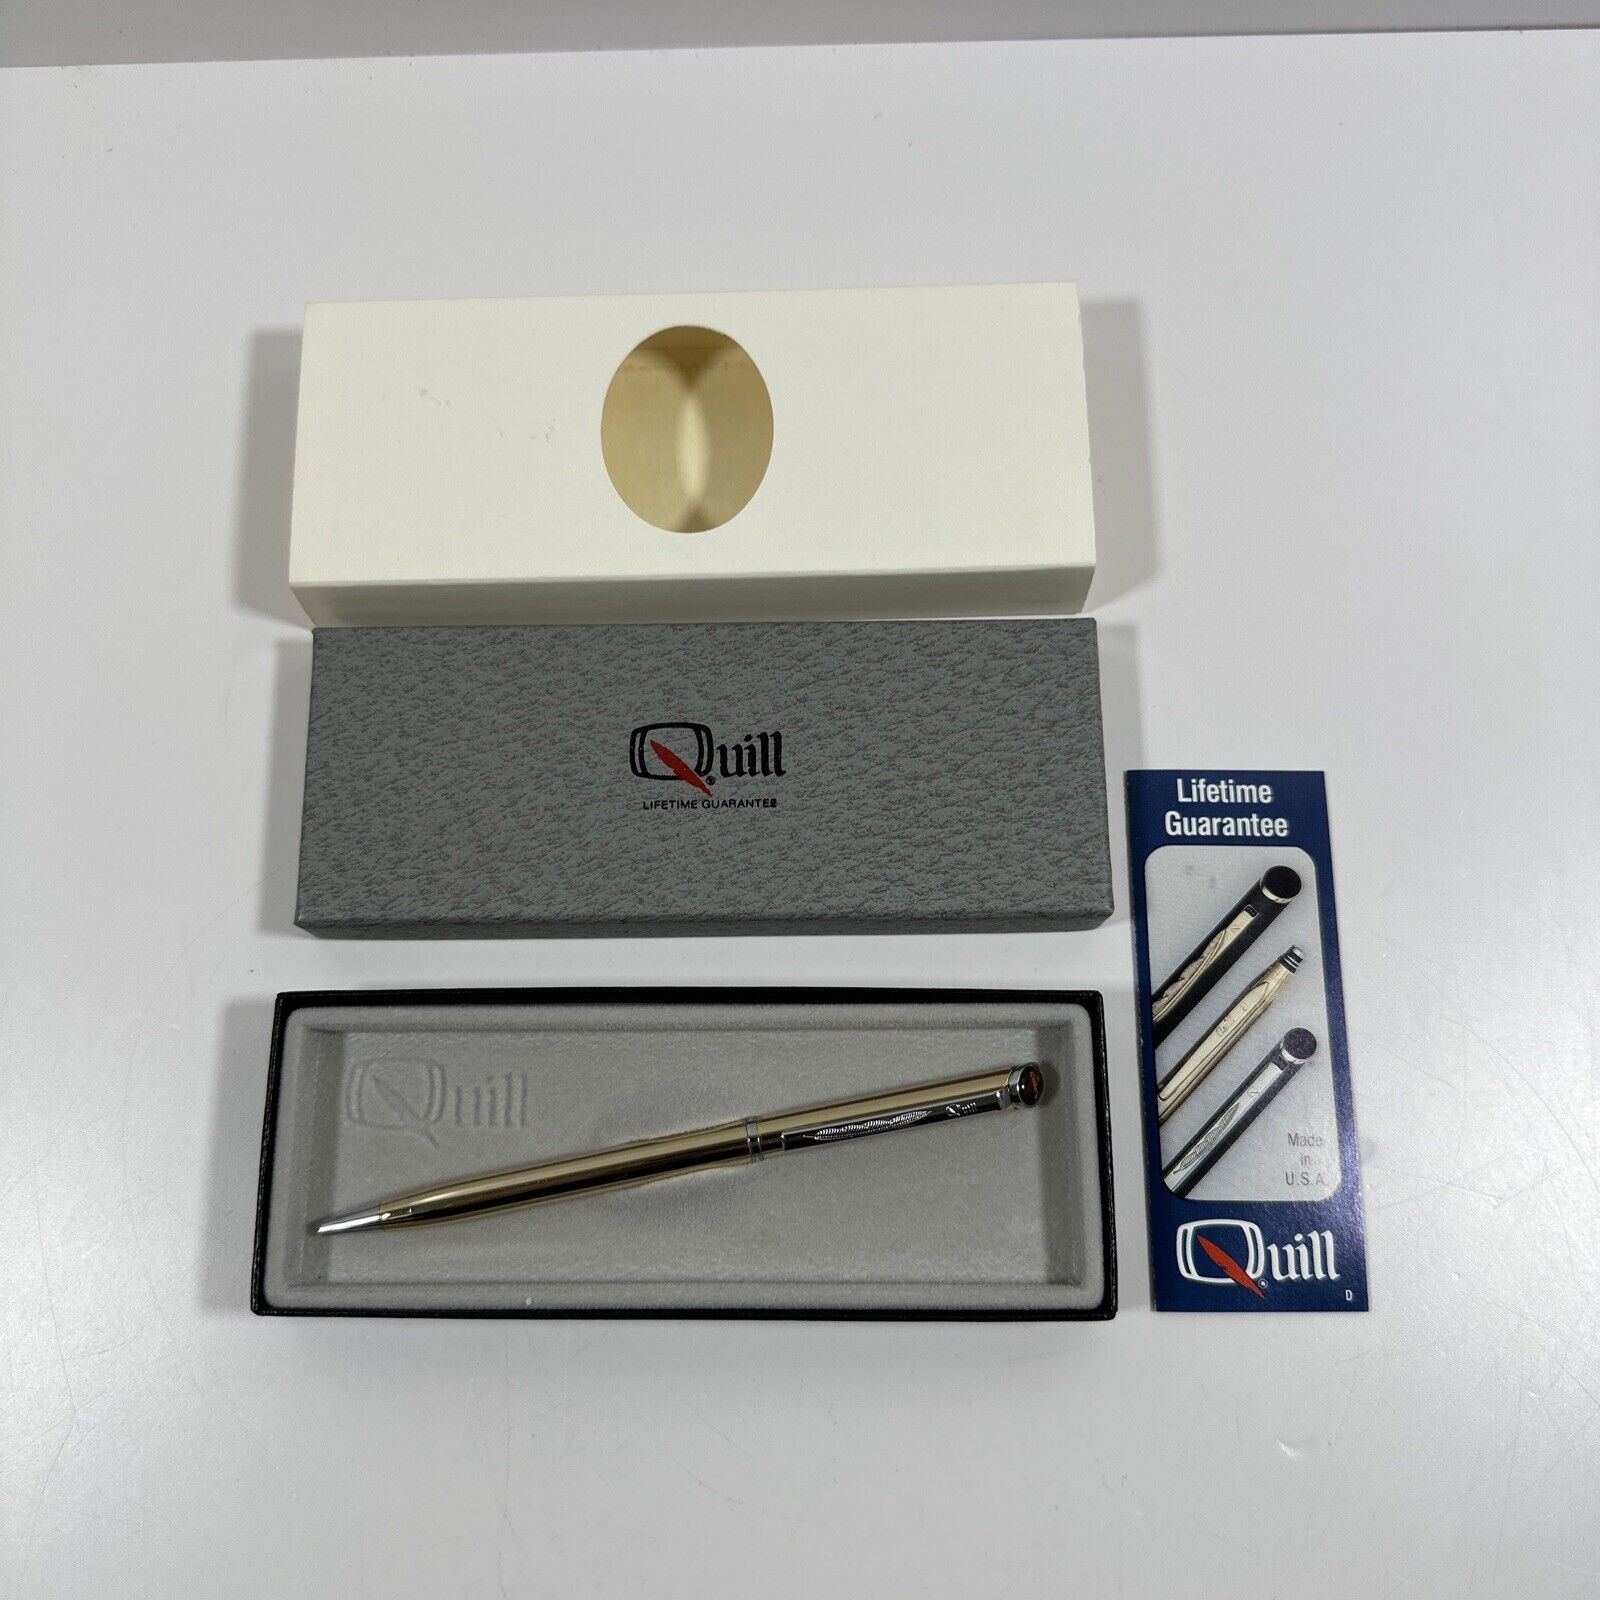 Vintage QUILL Gold Tone Ball Point Pen Unused in Original box New